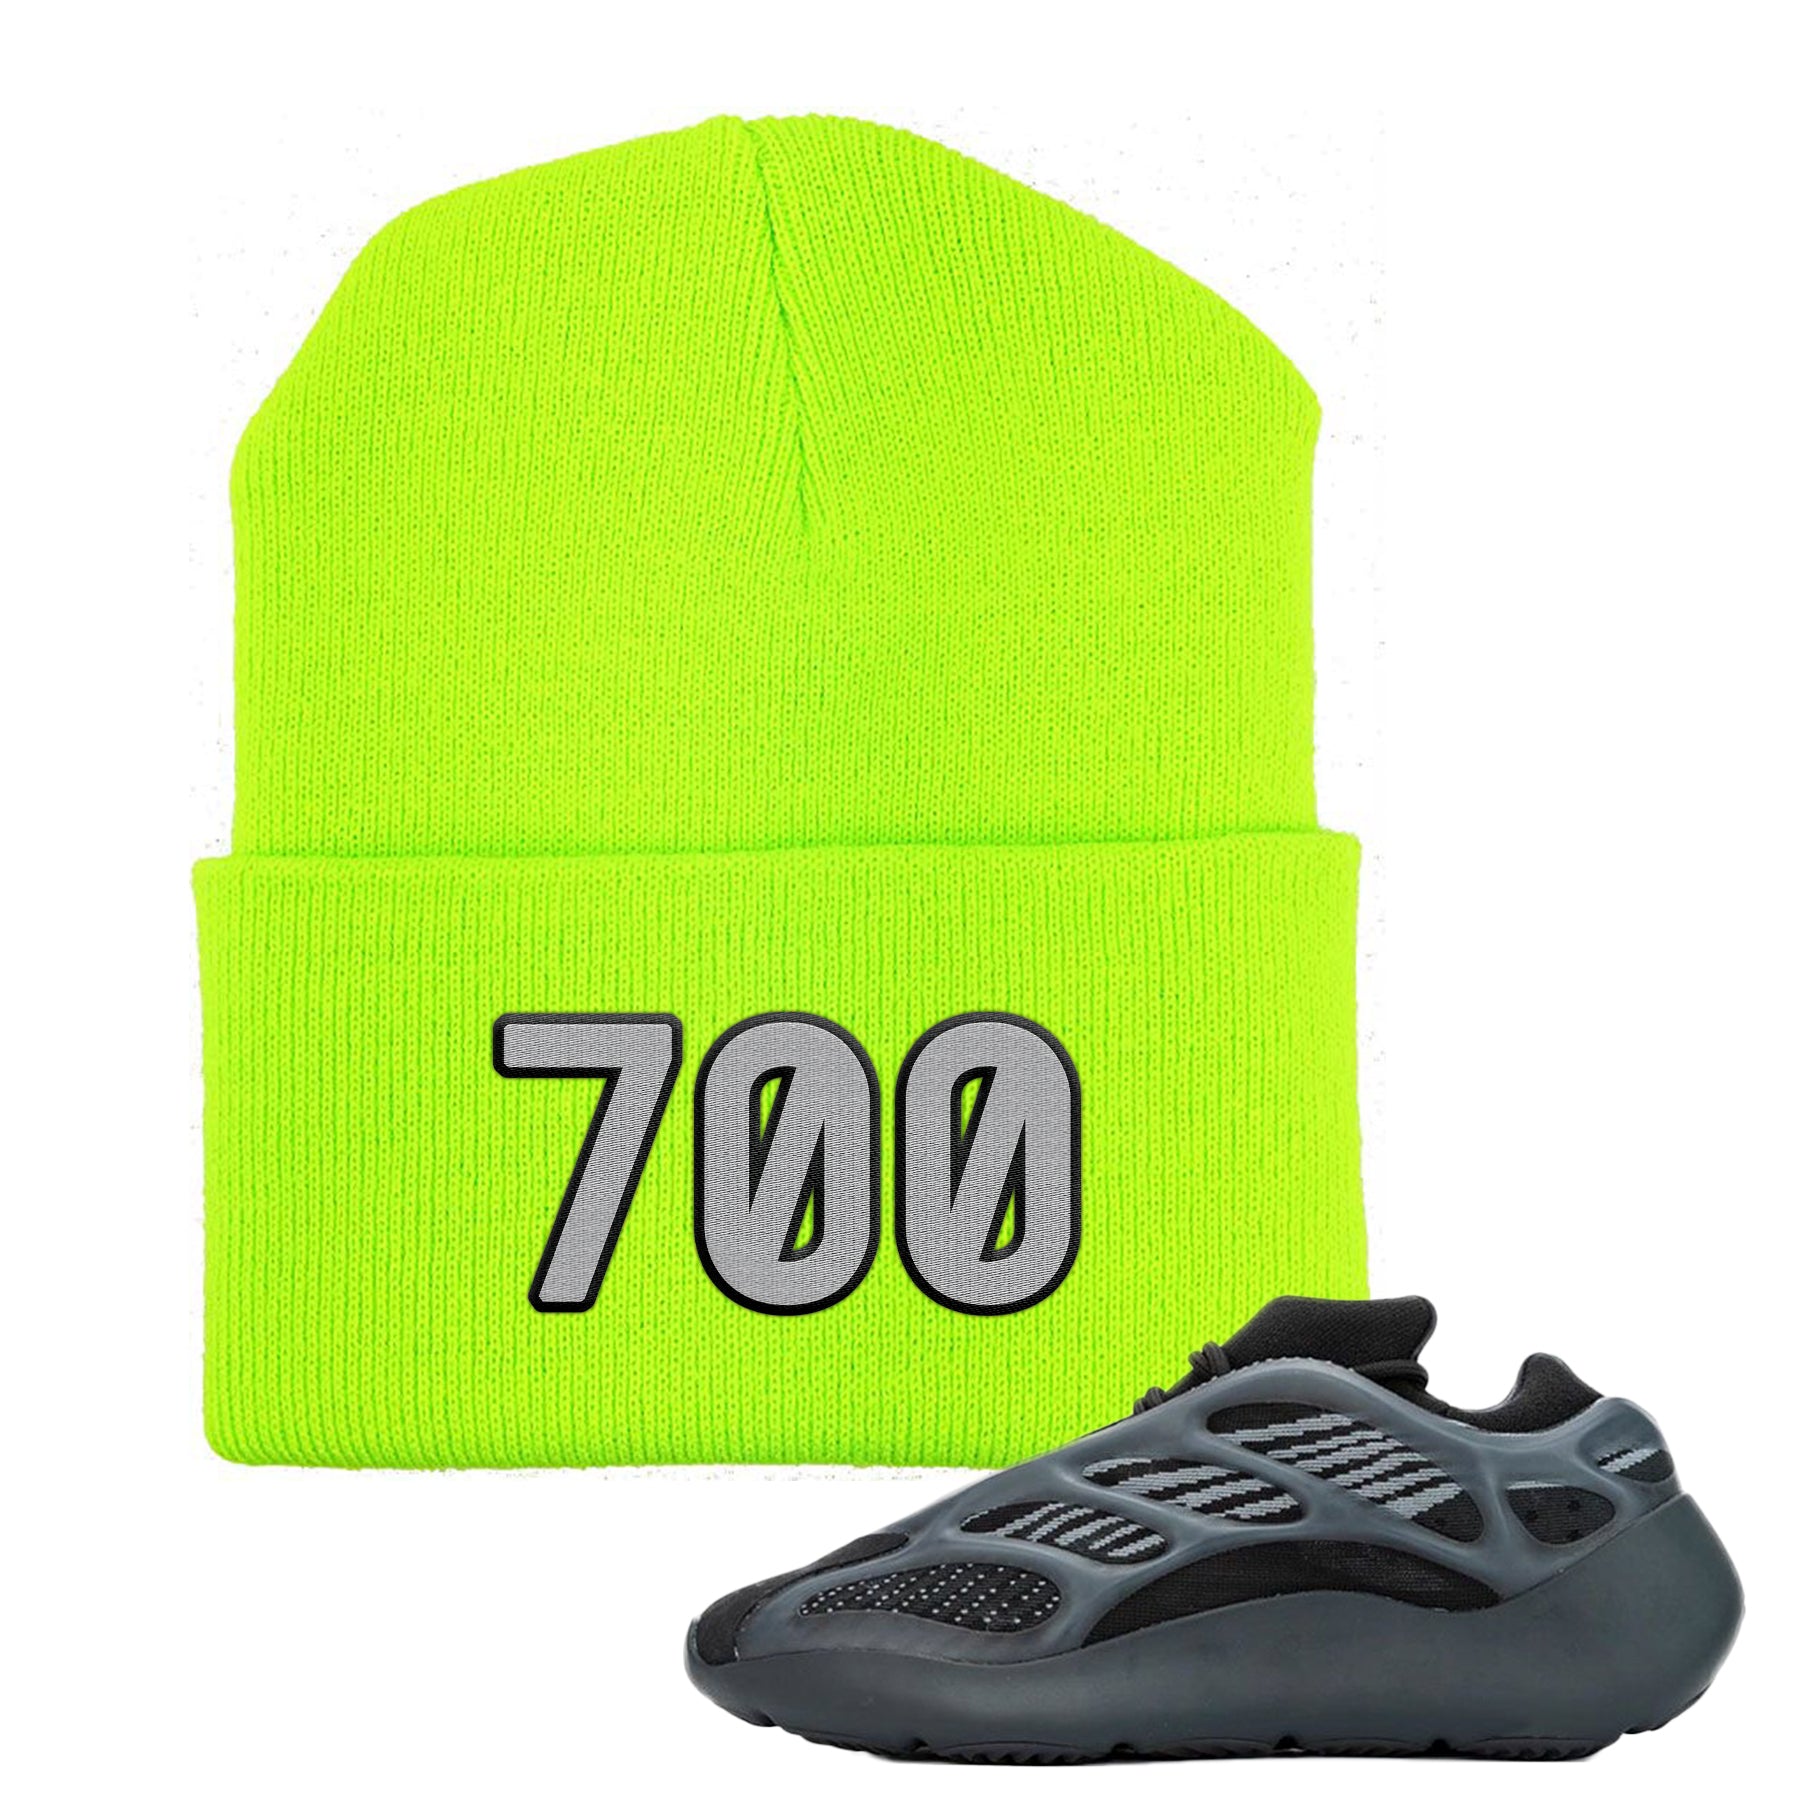 yeezy shoes lime green